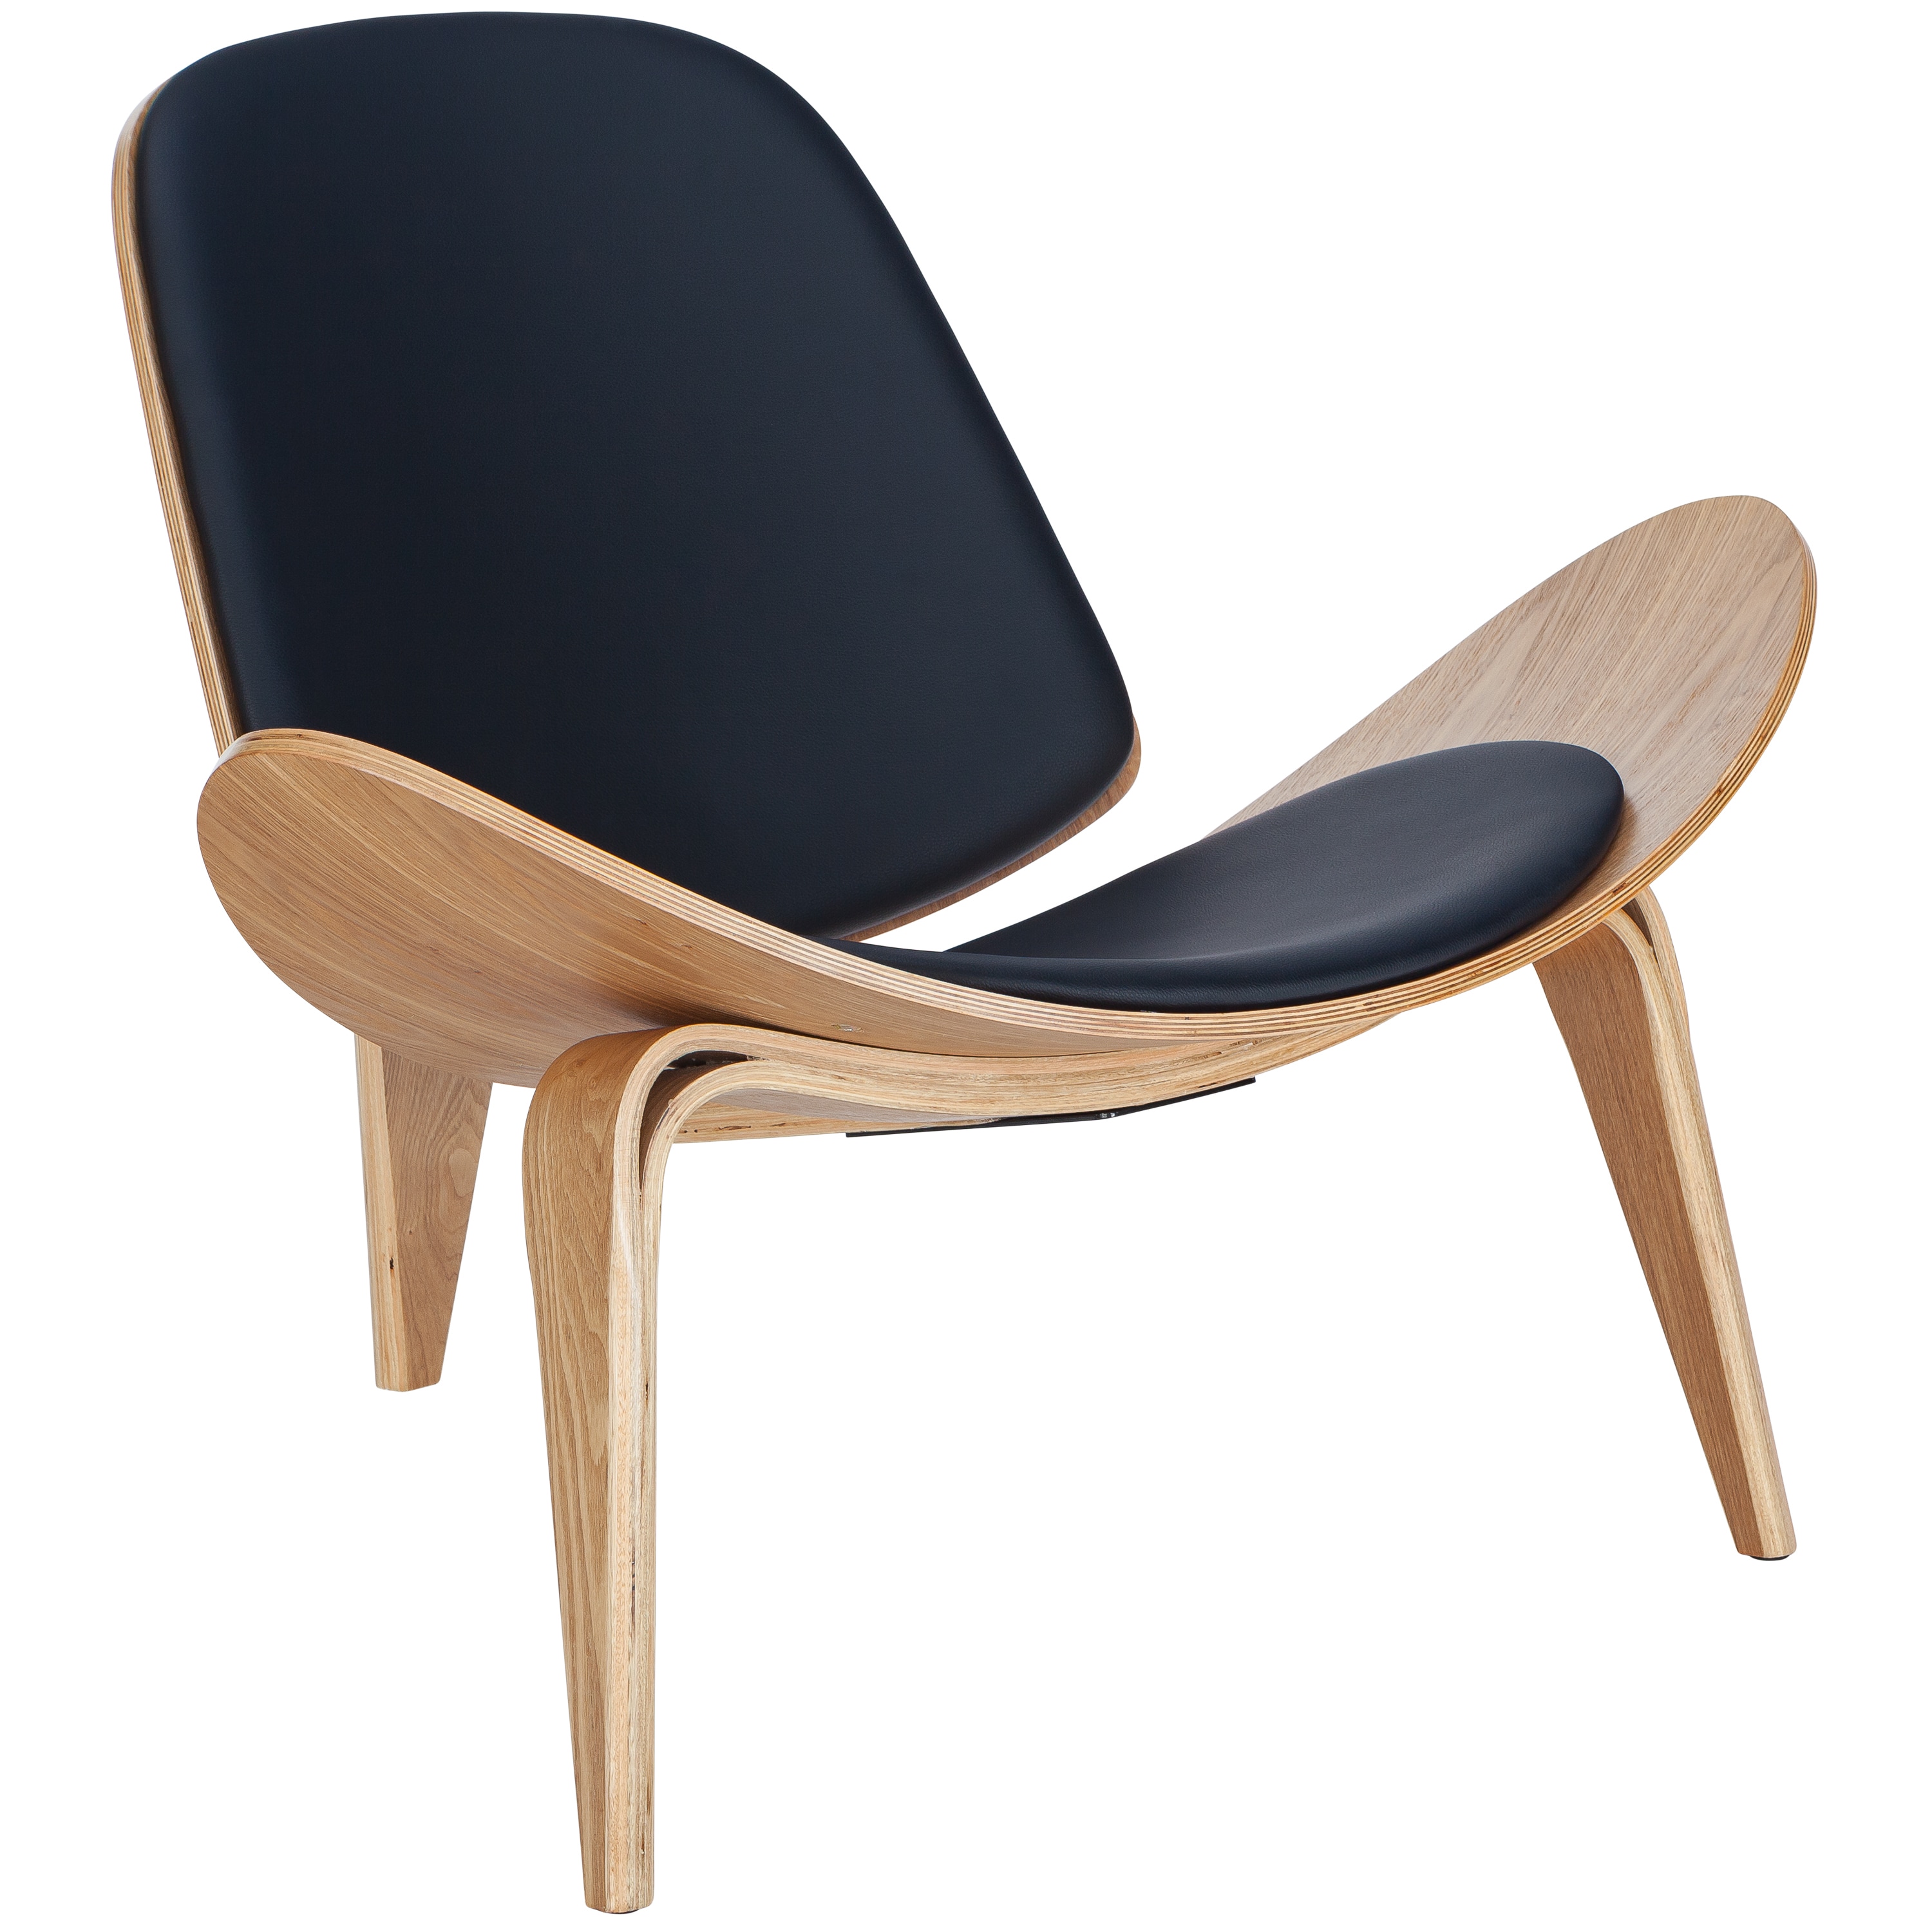 Shop Edgemod Contemporary Curved Plywood Lounge Chair On Sale